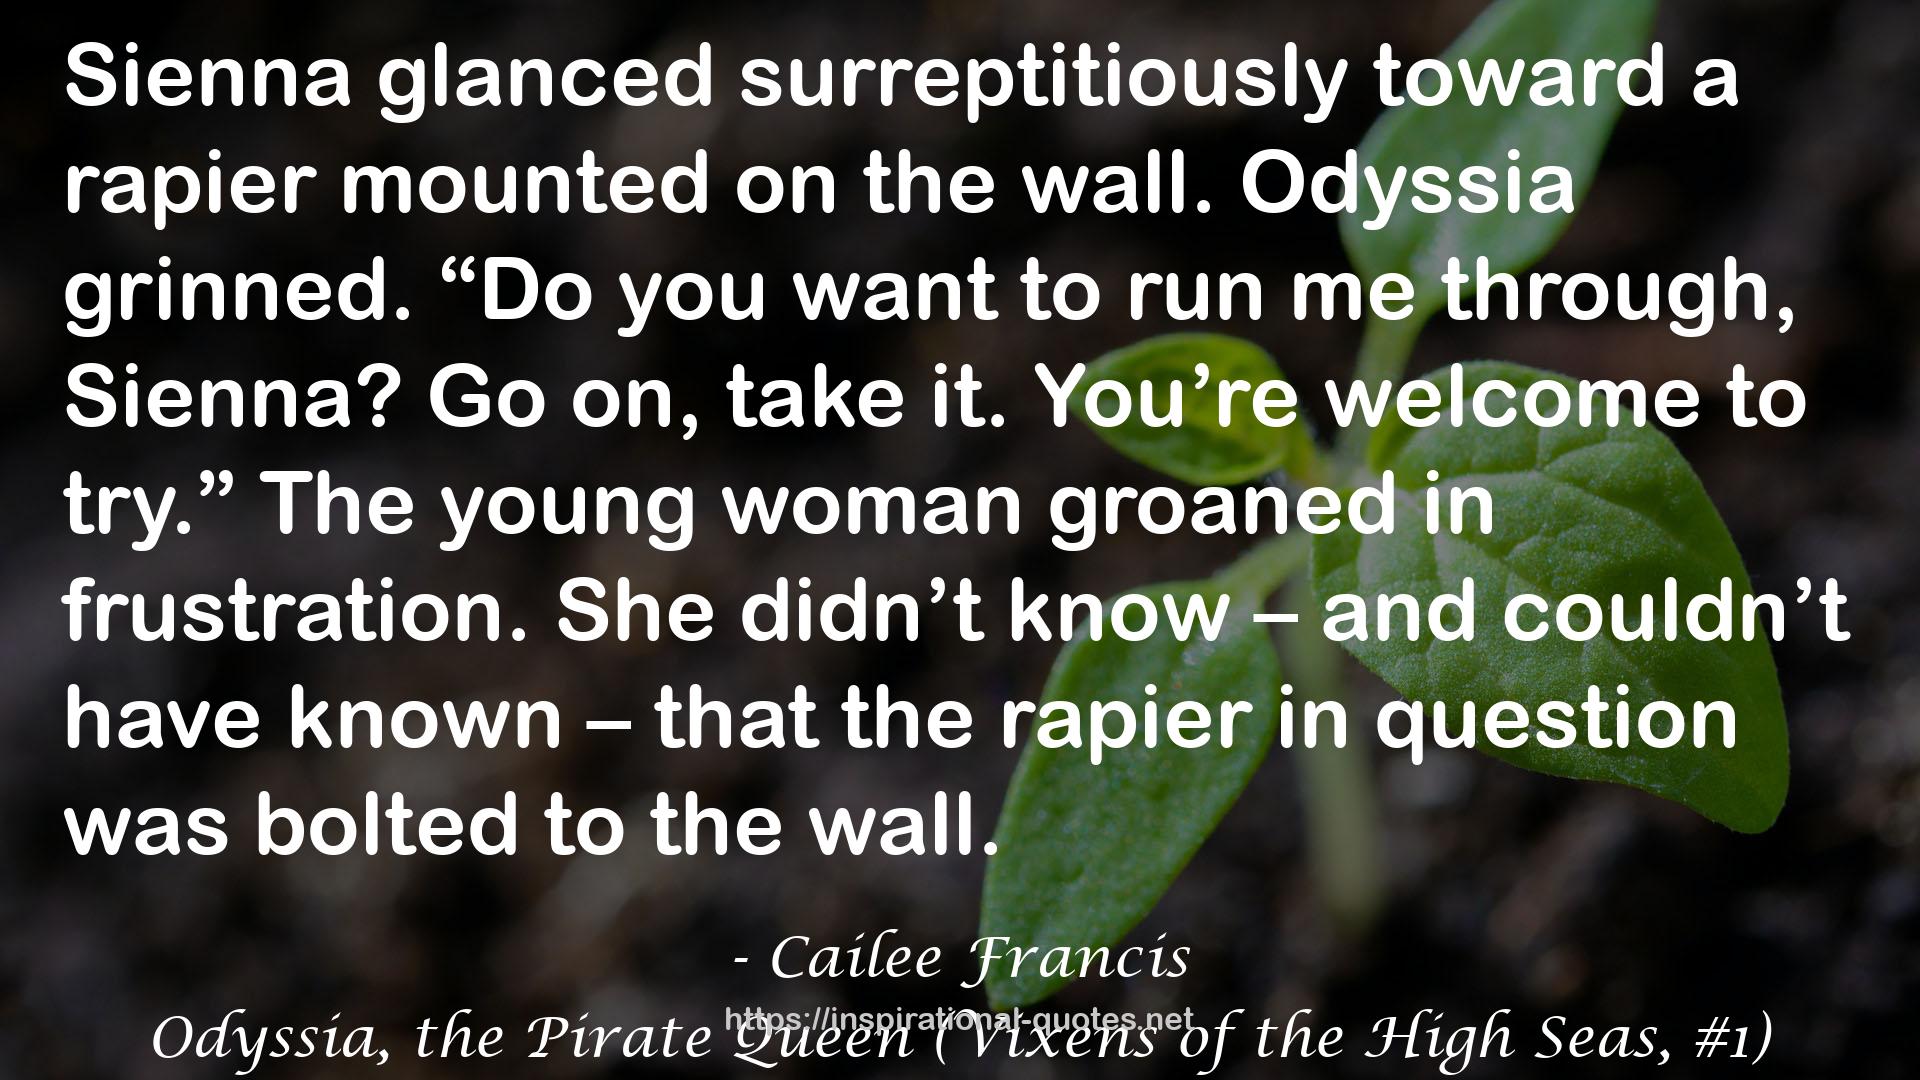 Odyssia, the Pirate Queen (Vixens of the High Seas, #1) QUOTES